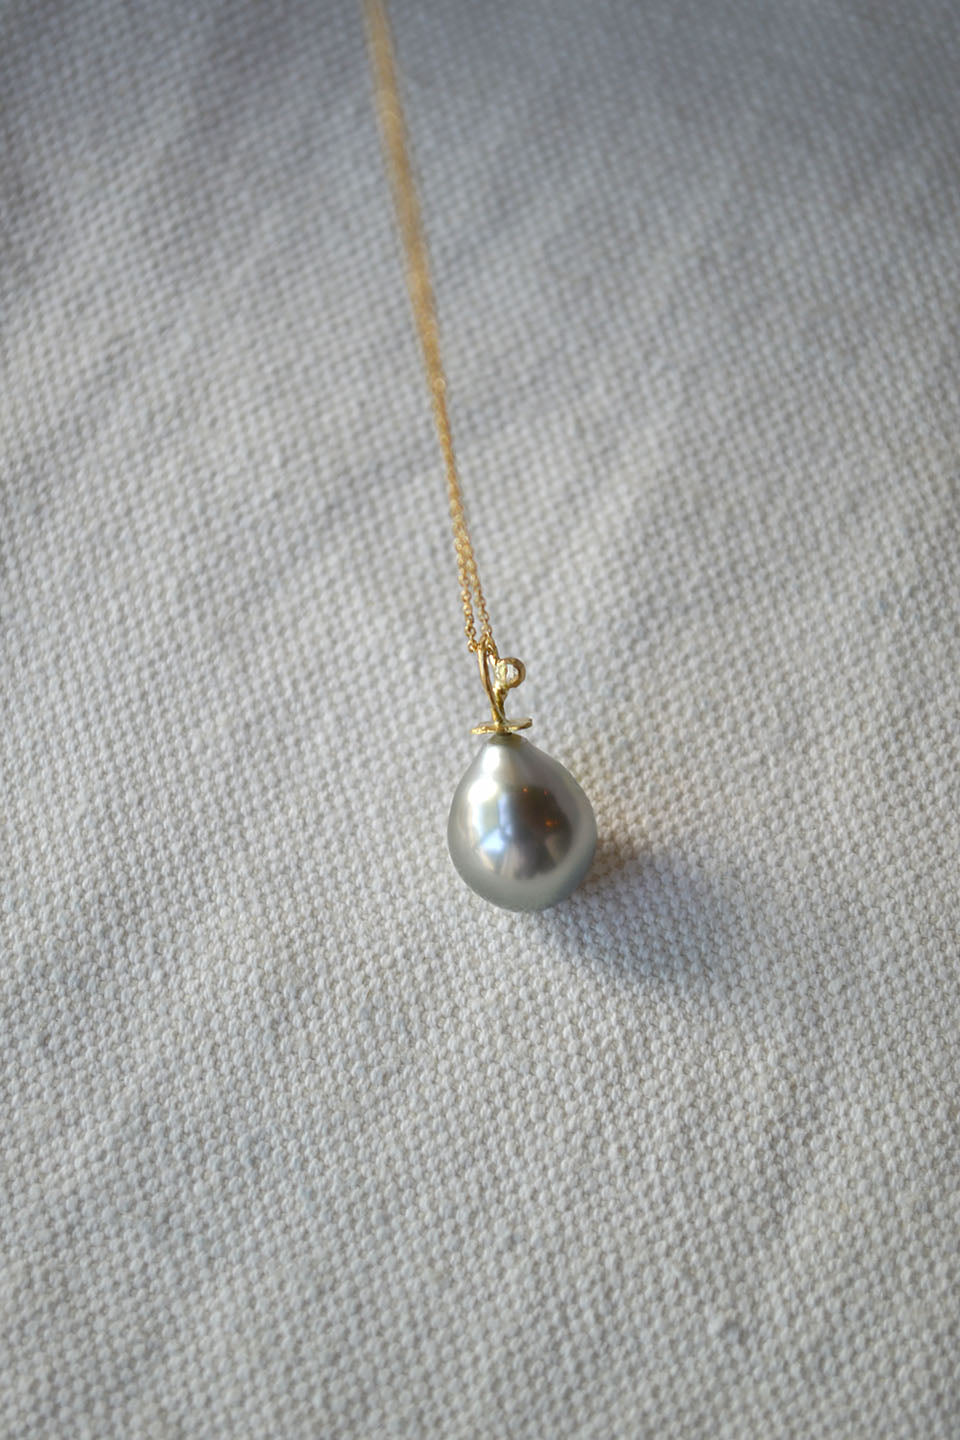 Pear Pearl Pendant and Gold Chain